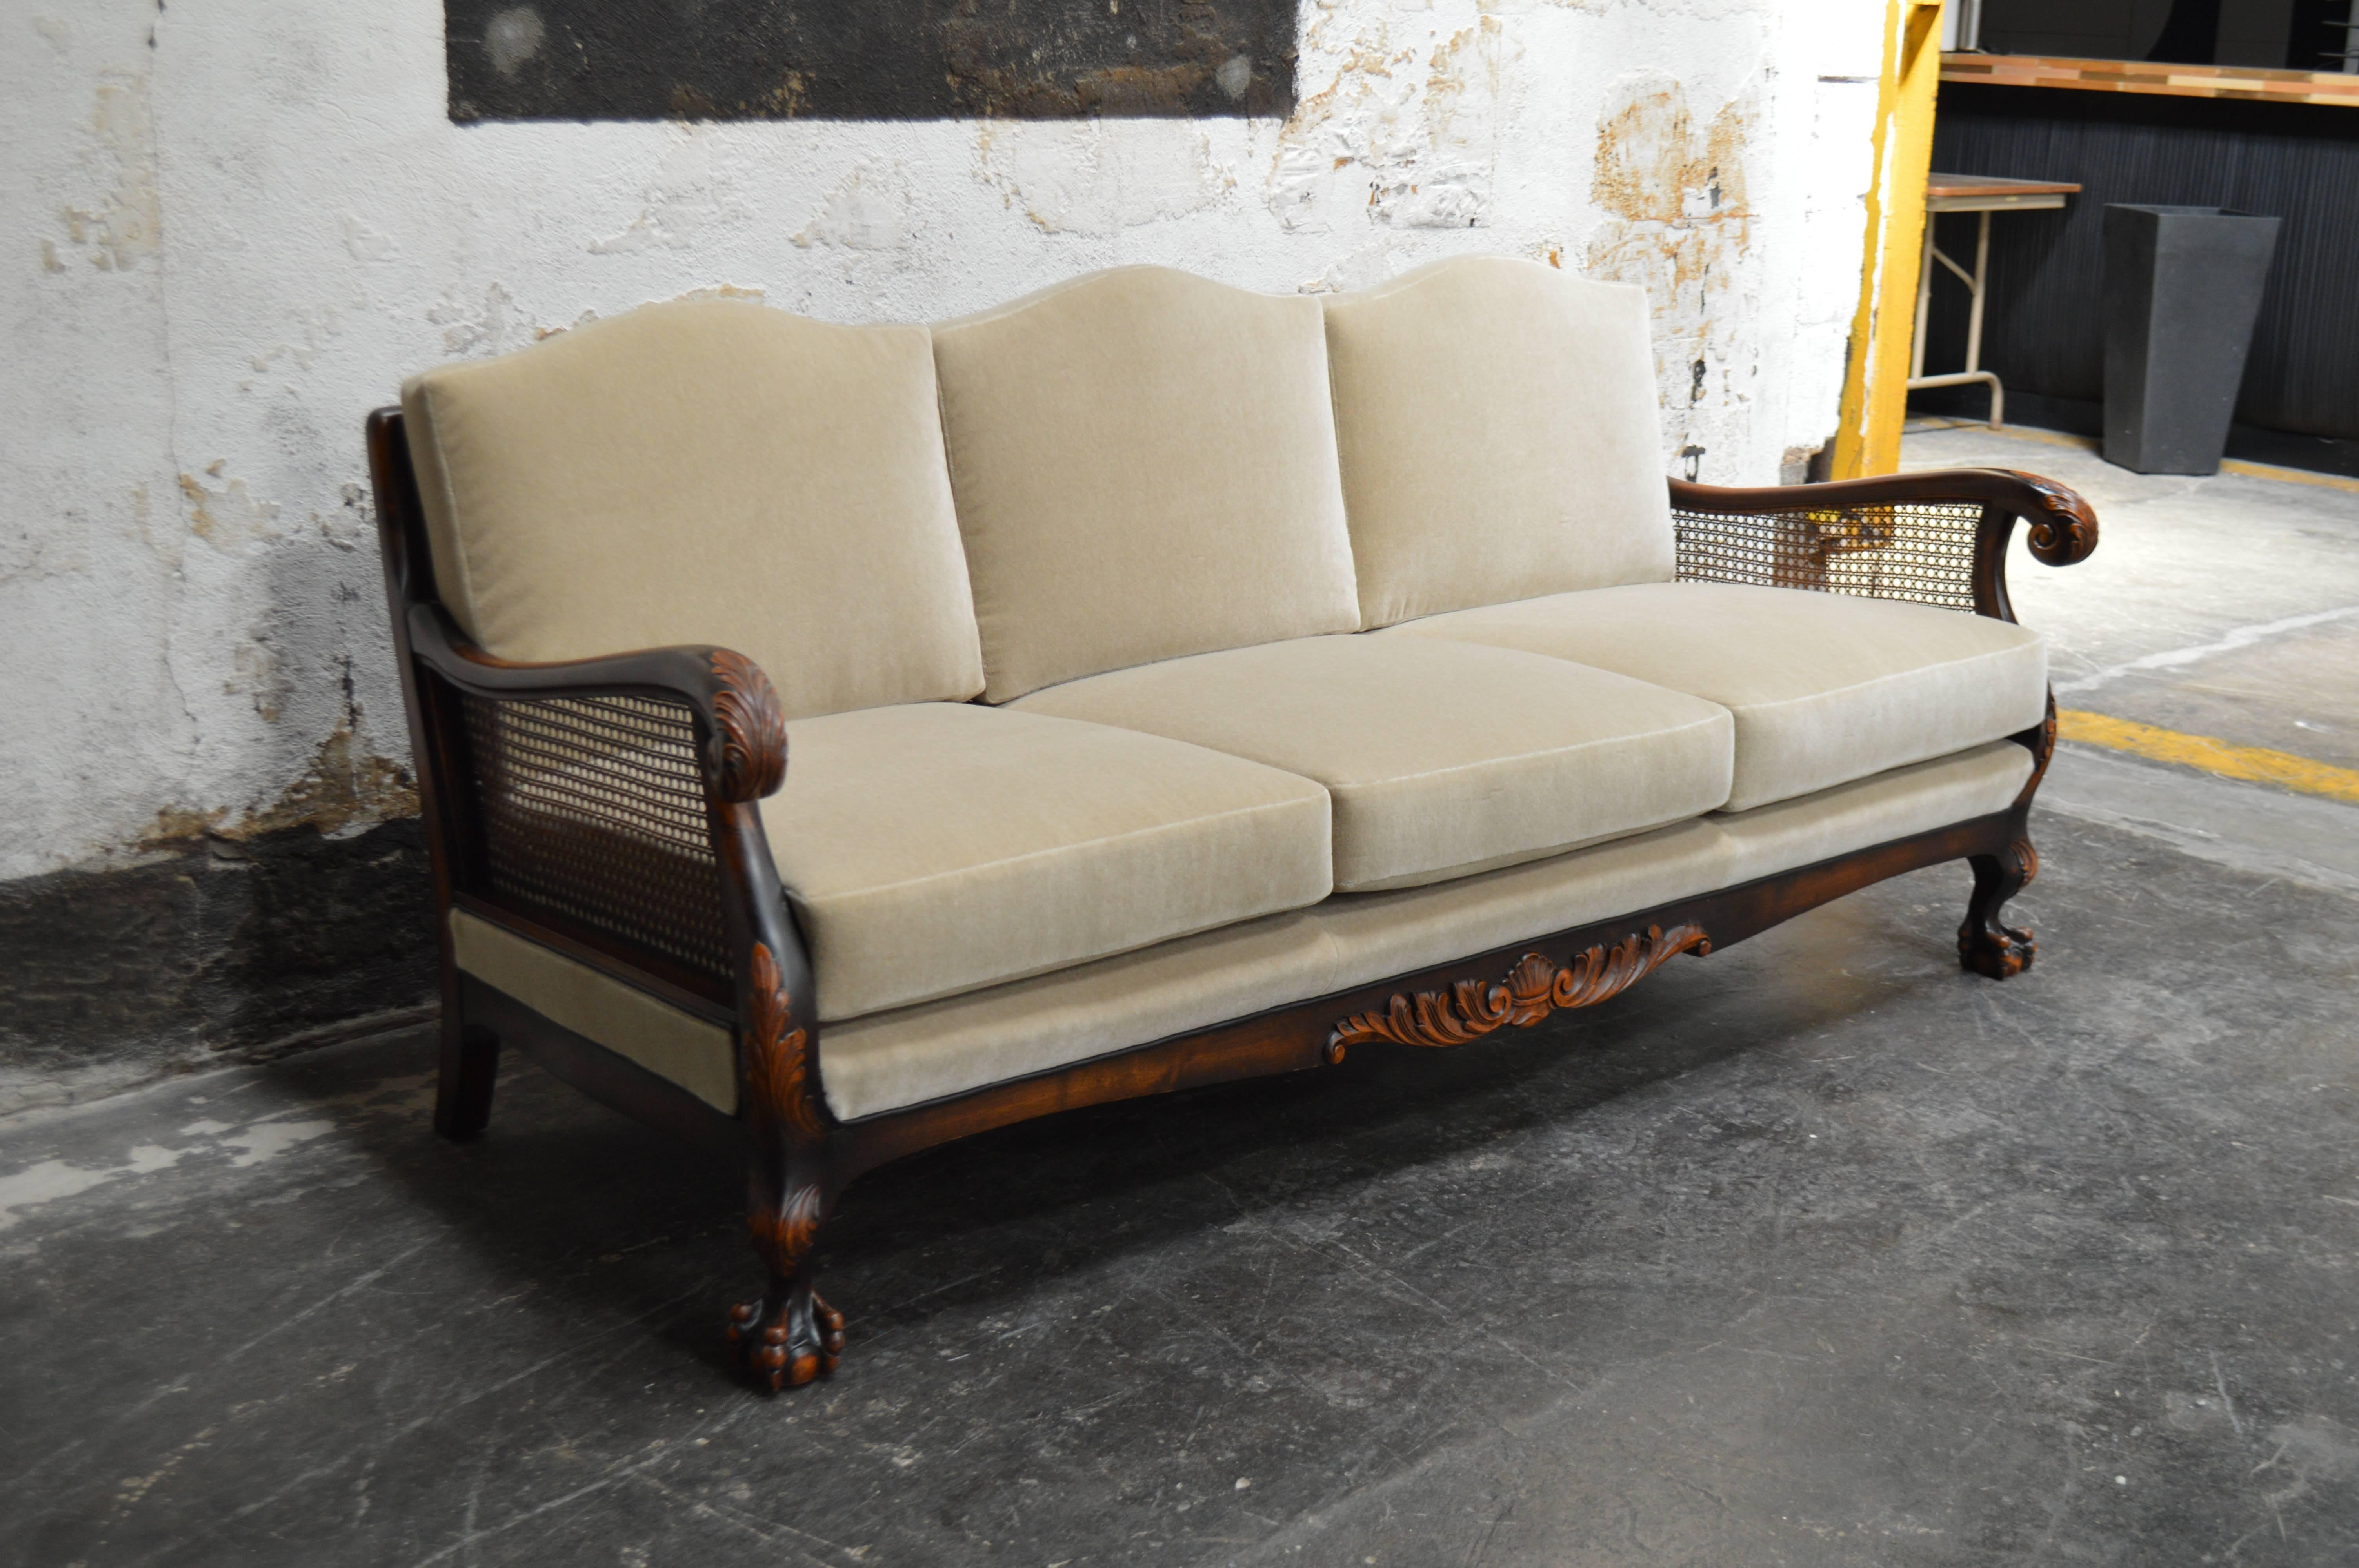 Dark flame birch carved sofa newly upholstered in beige mohair. Features caned back and arms and exposed carved wood that has a handsomely aged patina. Cushions have eight-way hand-tied springs and new recycled foam.

Fabric swatch available upon